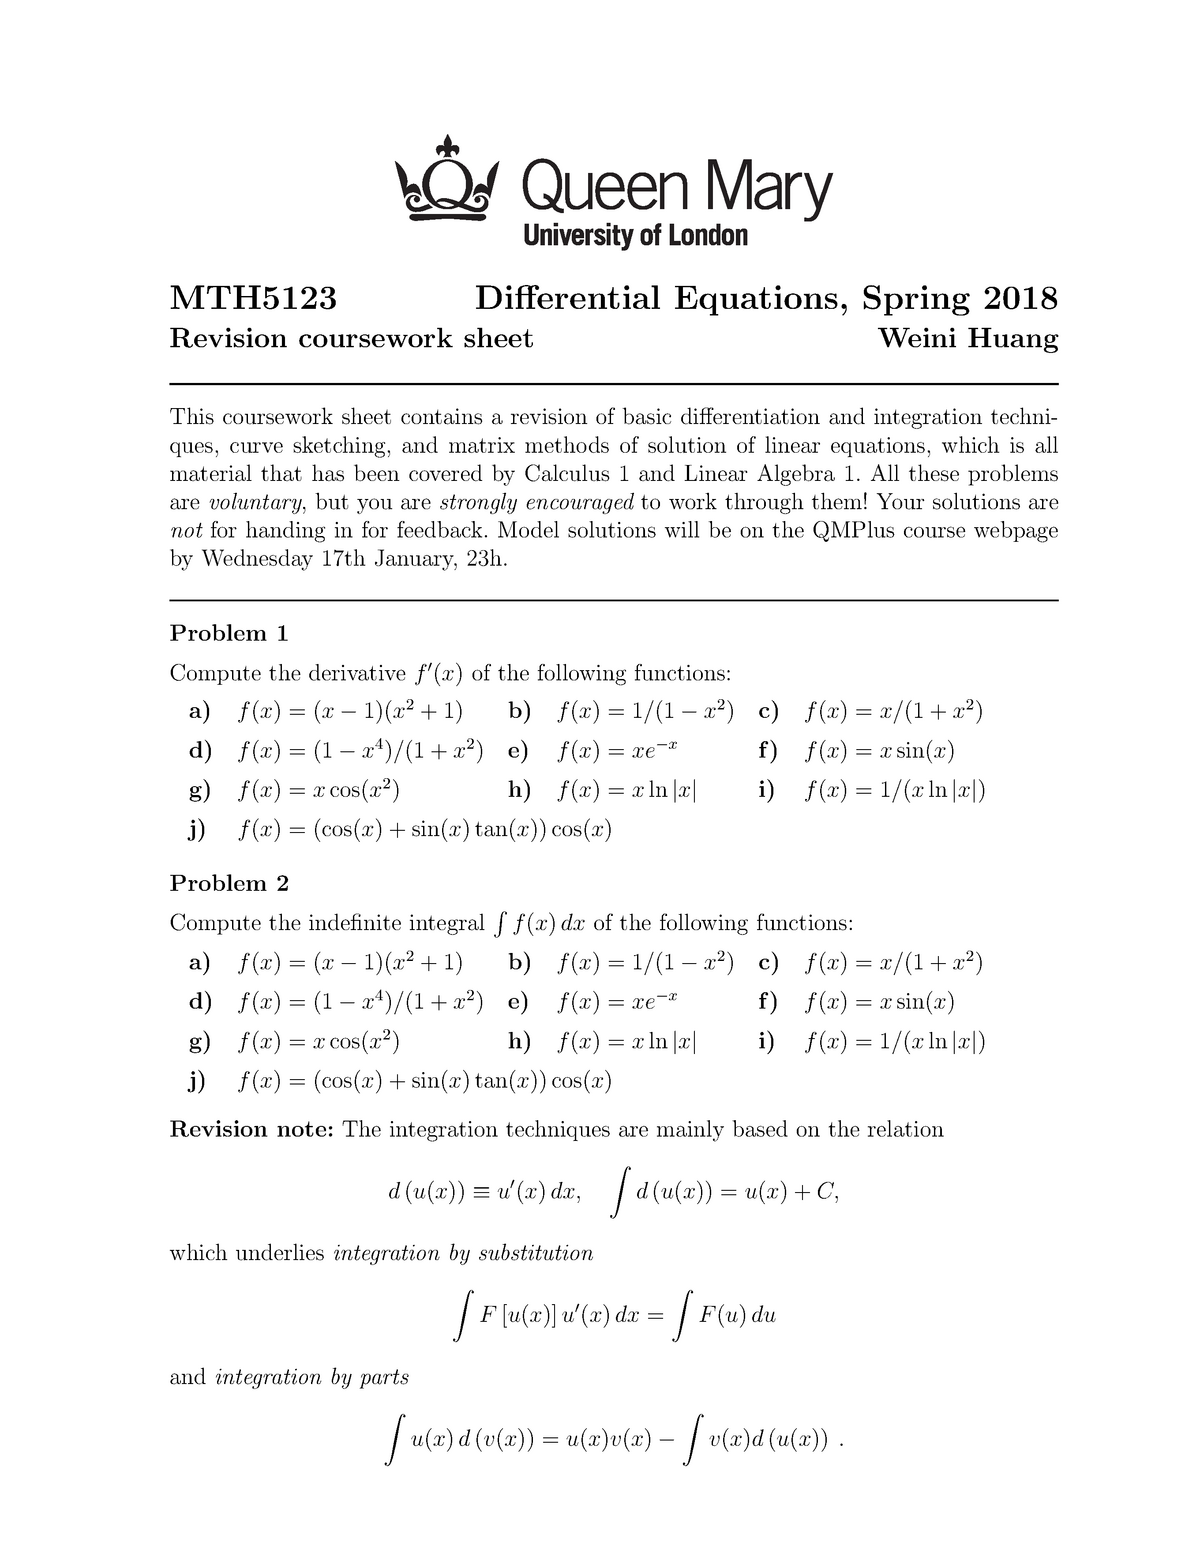 Differential Equations Cw1 Mth5123 Differential Equations Spring 18 Revision Coursework Sheet Weini Huang This Coursework Sheet Contains Revision Of Basic Studocu